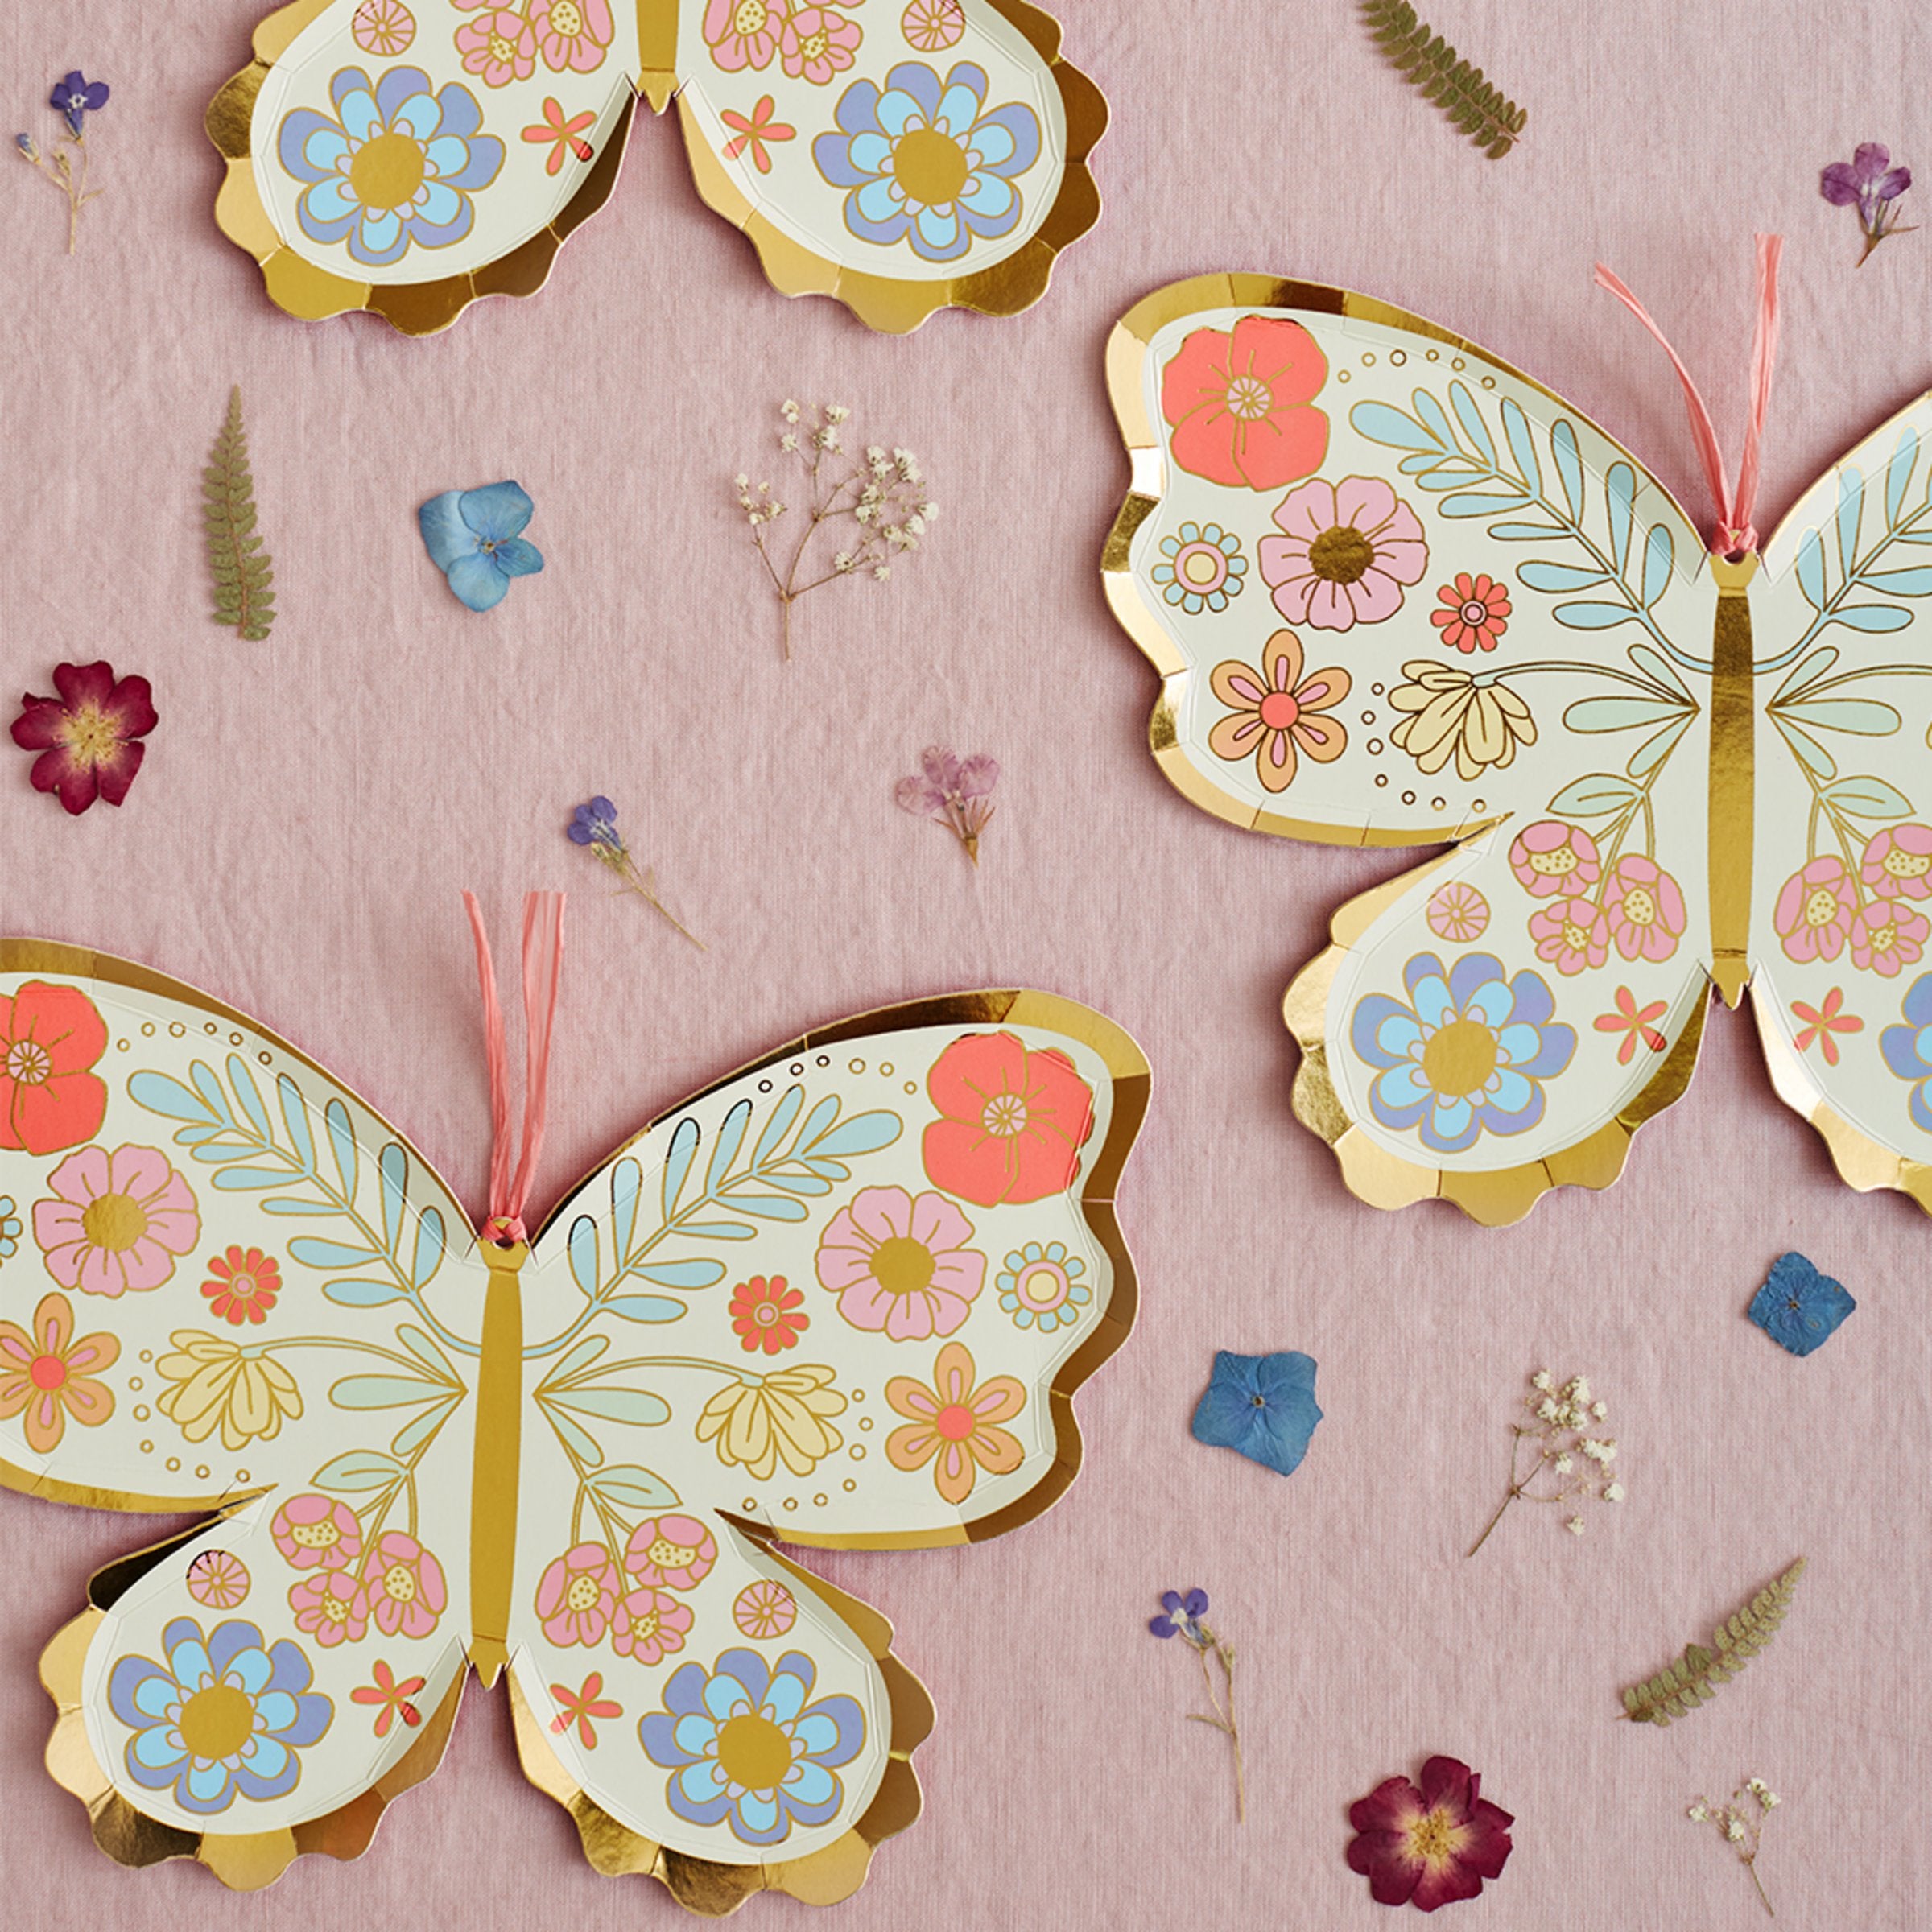 Our party plates, in the shape of a butterfly with lots of floral designs, are so pretty.